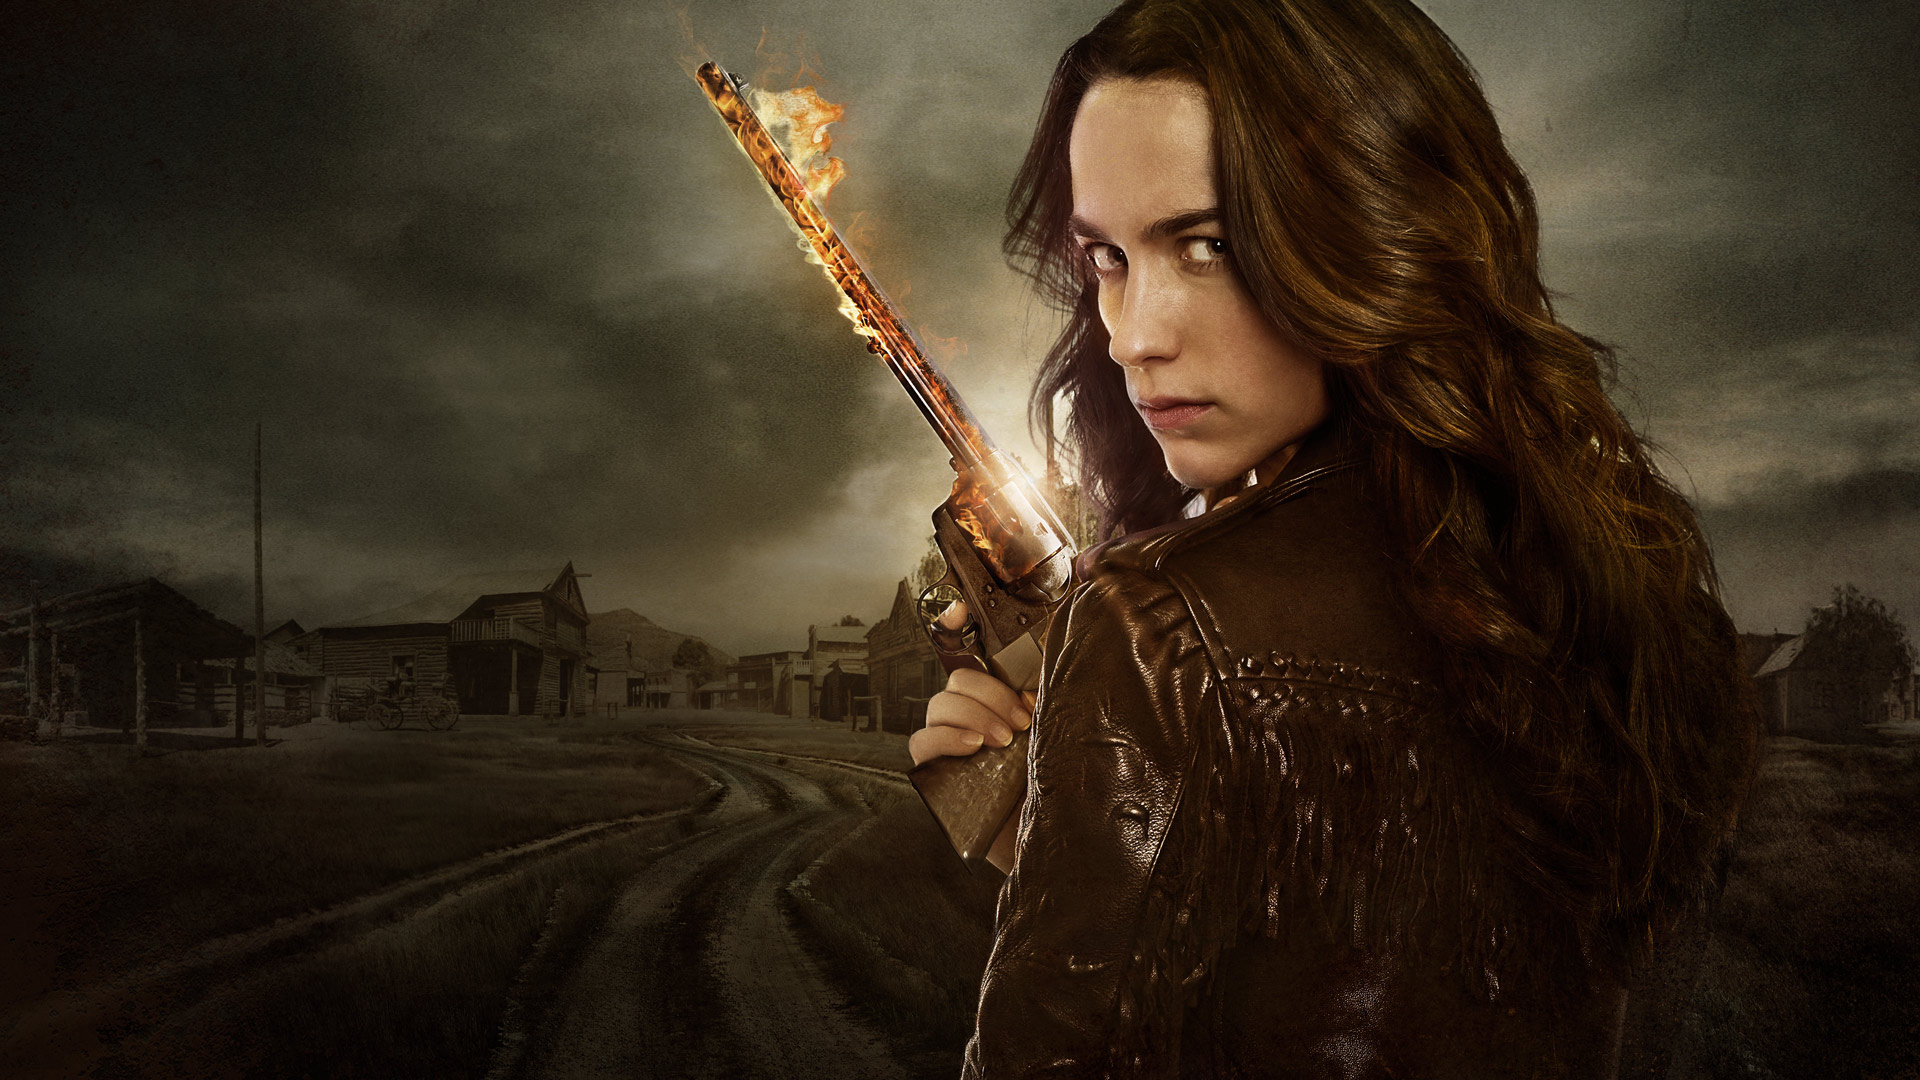 Wynonna Earp, TV series, Exciting wallpapers, Action-packed scenes, 1920x1080 Full HD Desktop